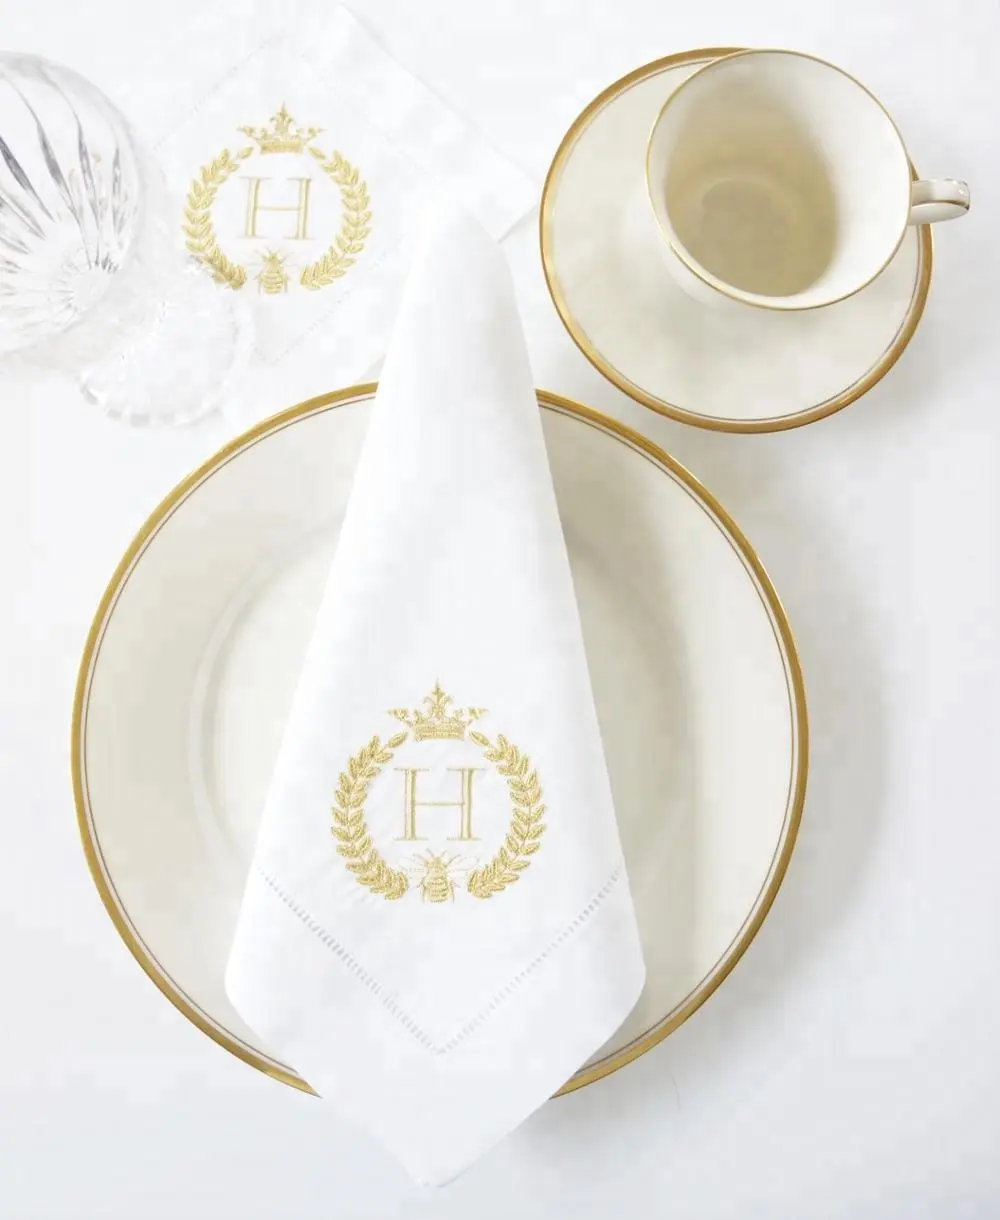 100% Linen Napkins, Silver thread napkin with embroidery and monogram service